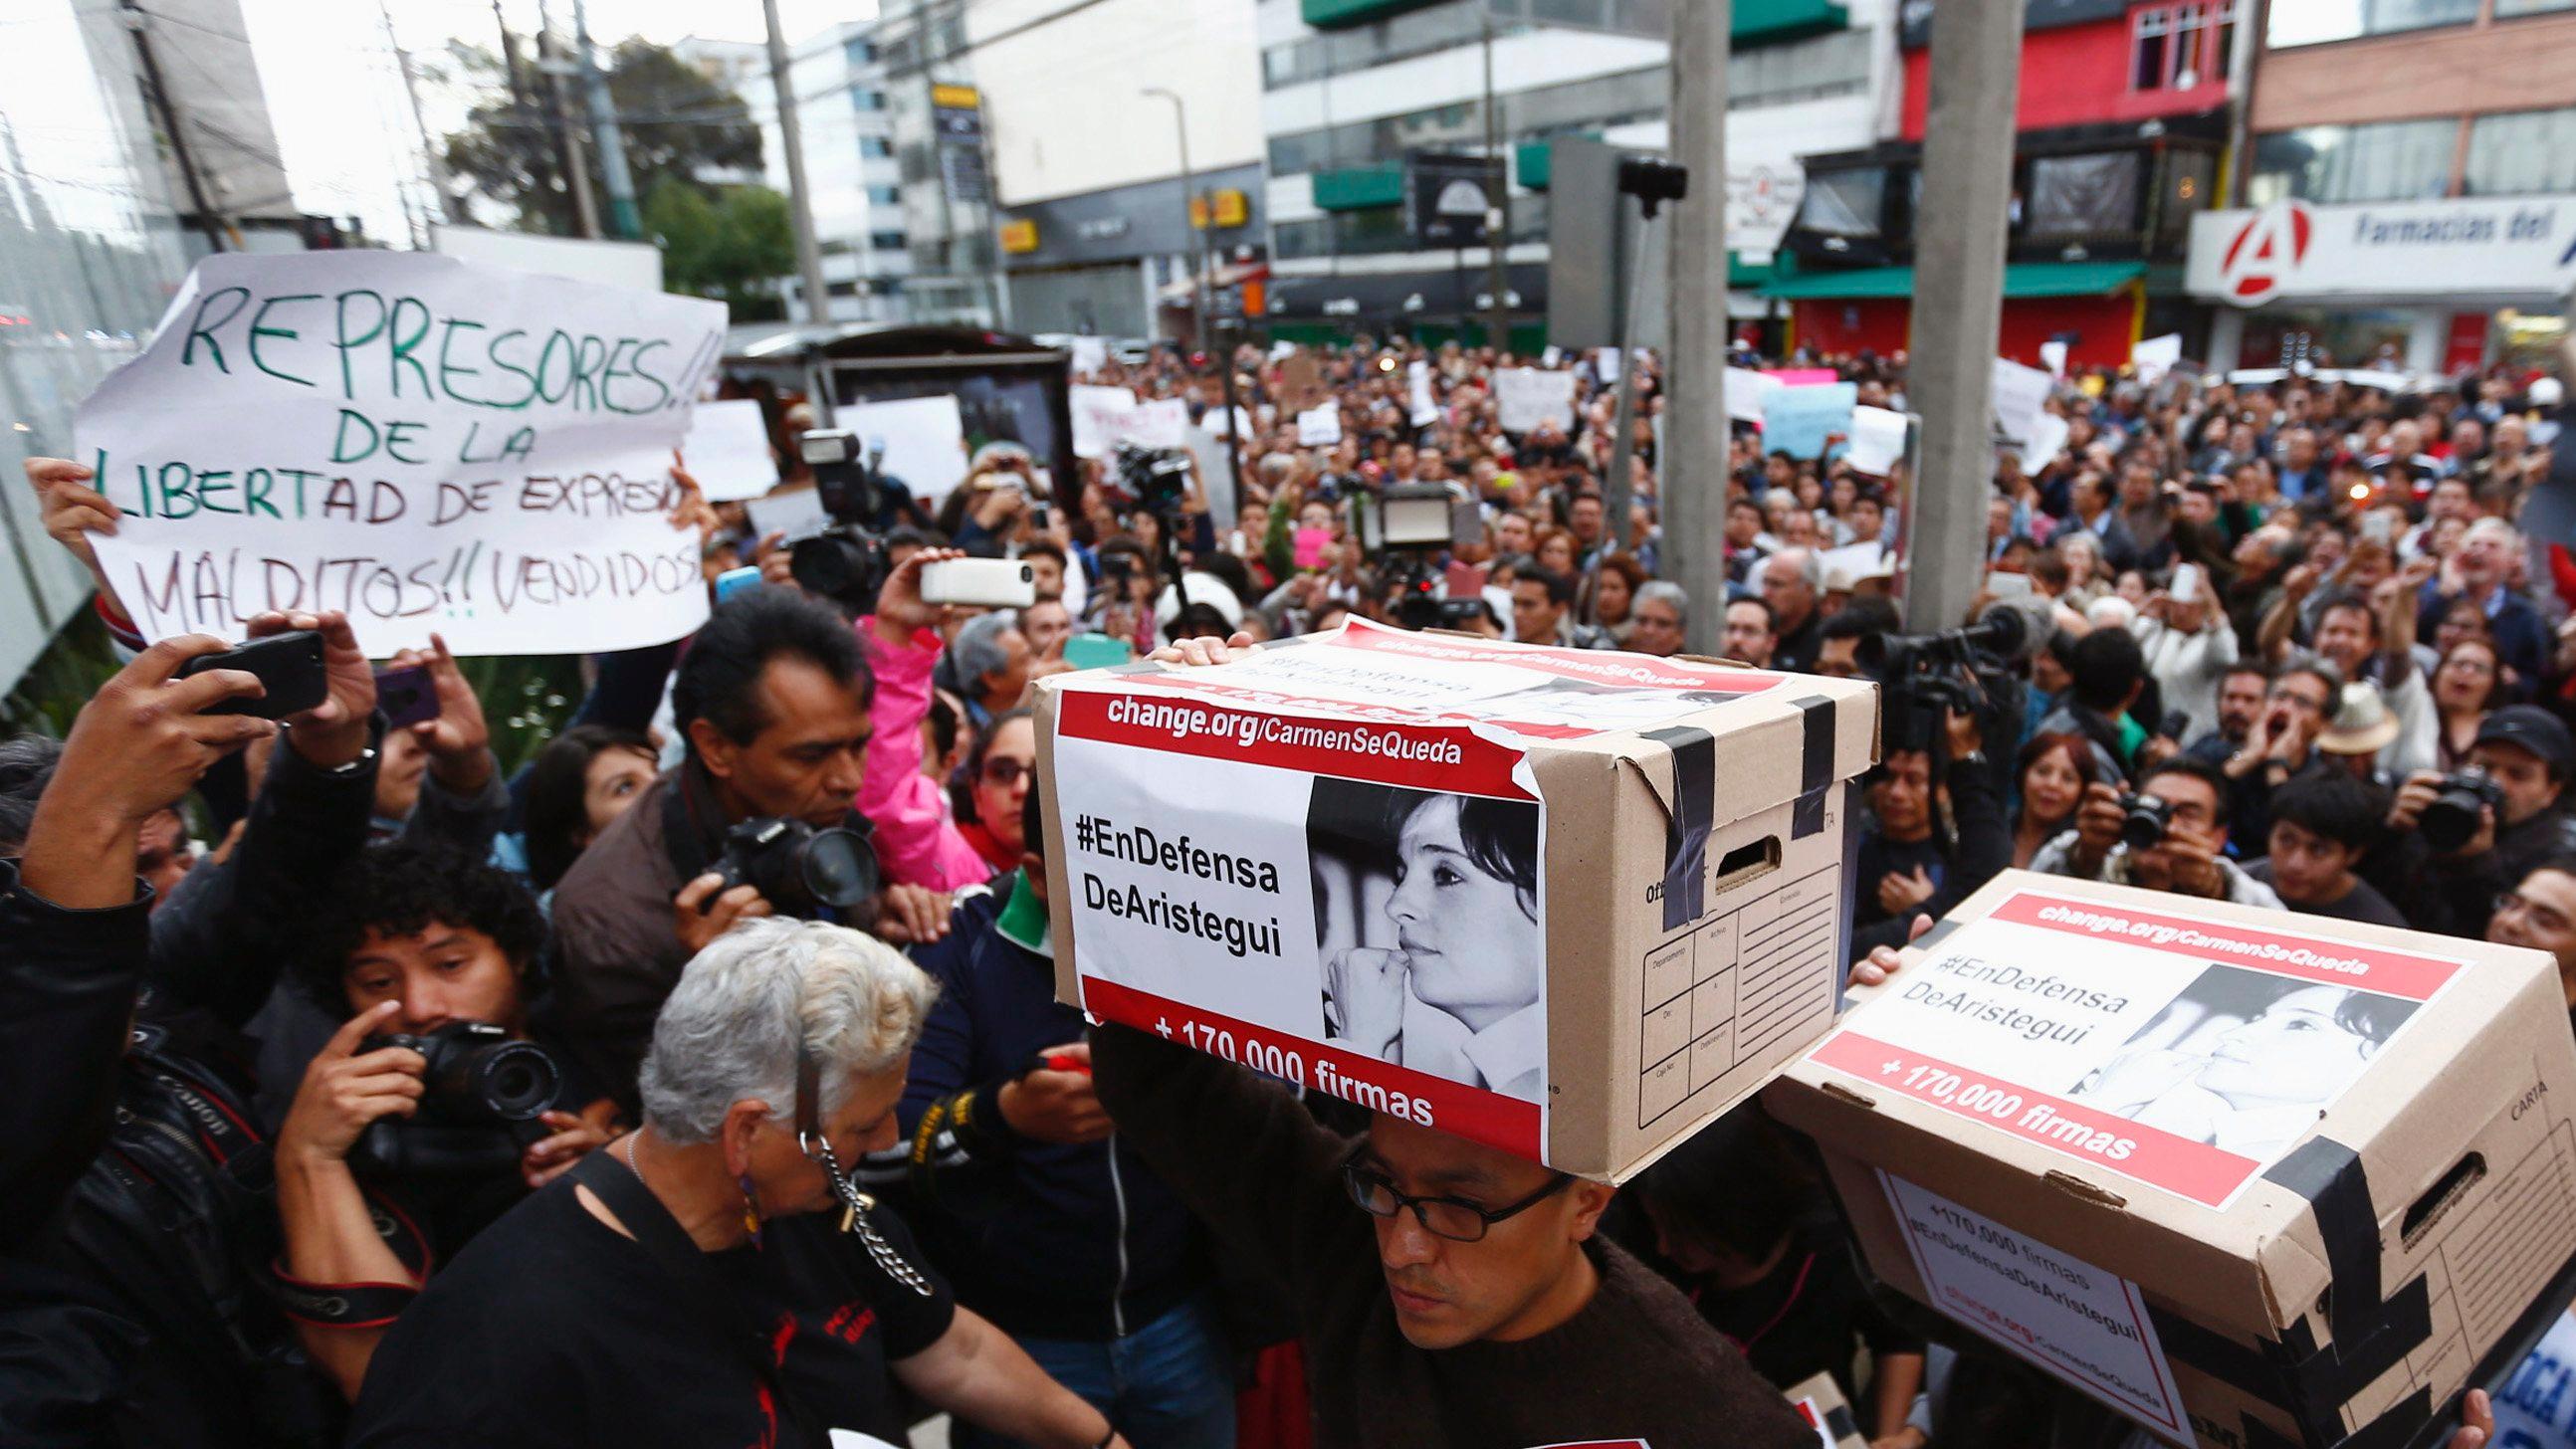 Supporters deliver signatures in support of Mexican journalist Carmen Aristegui during a protest against her dismissal outside MVS Radio's station building in Mexico City March 16, 2015.